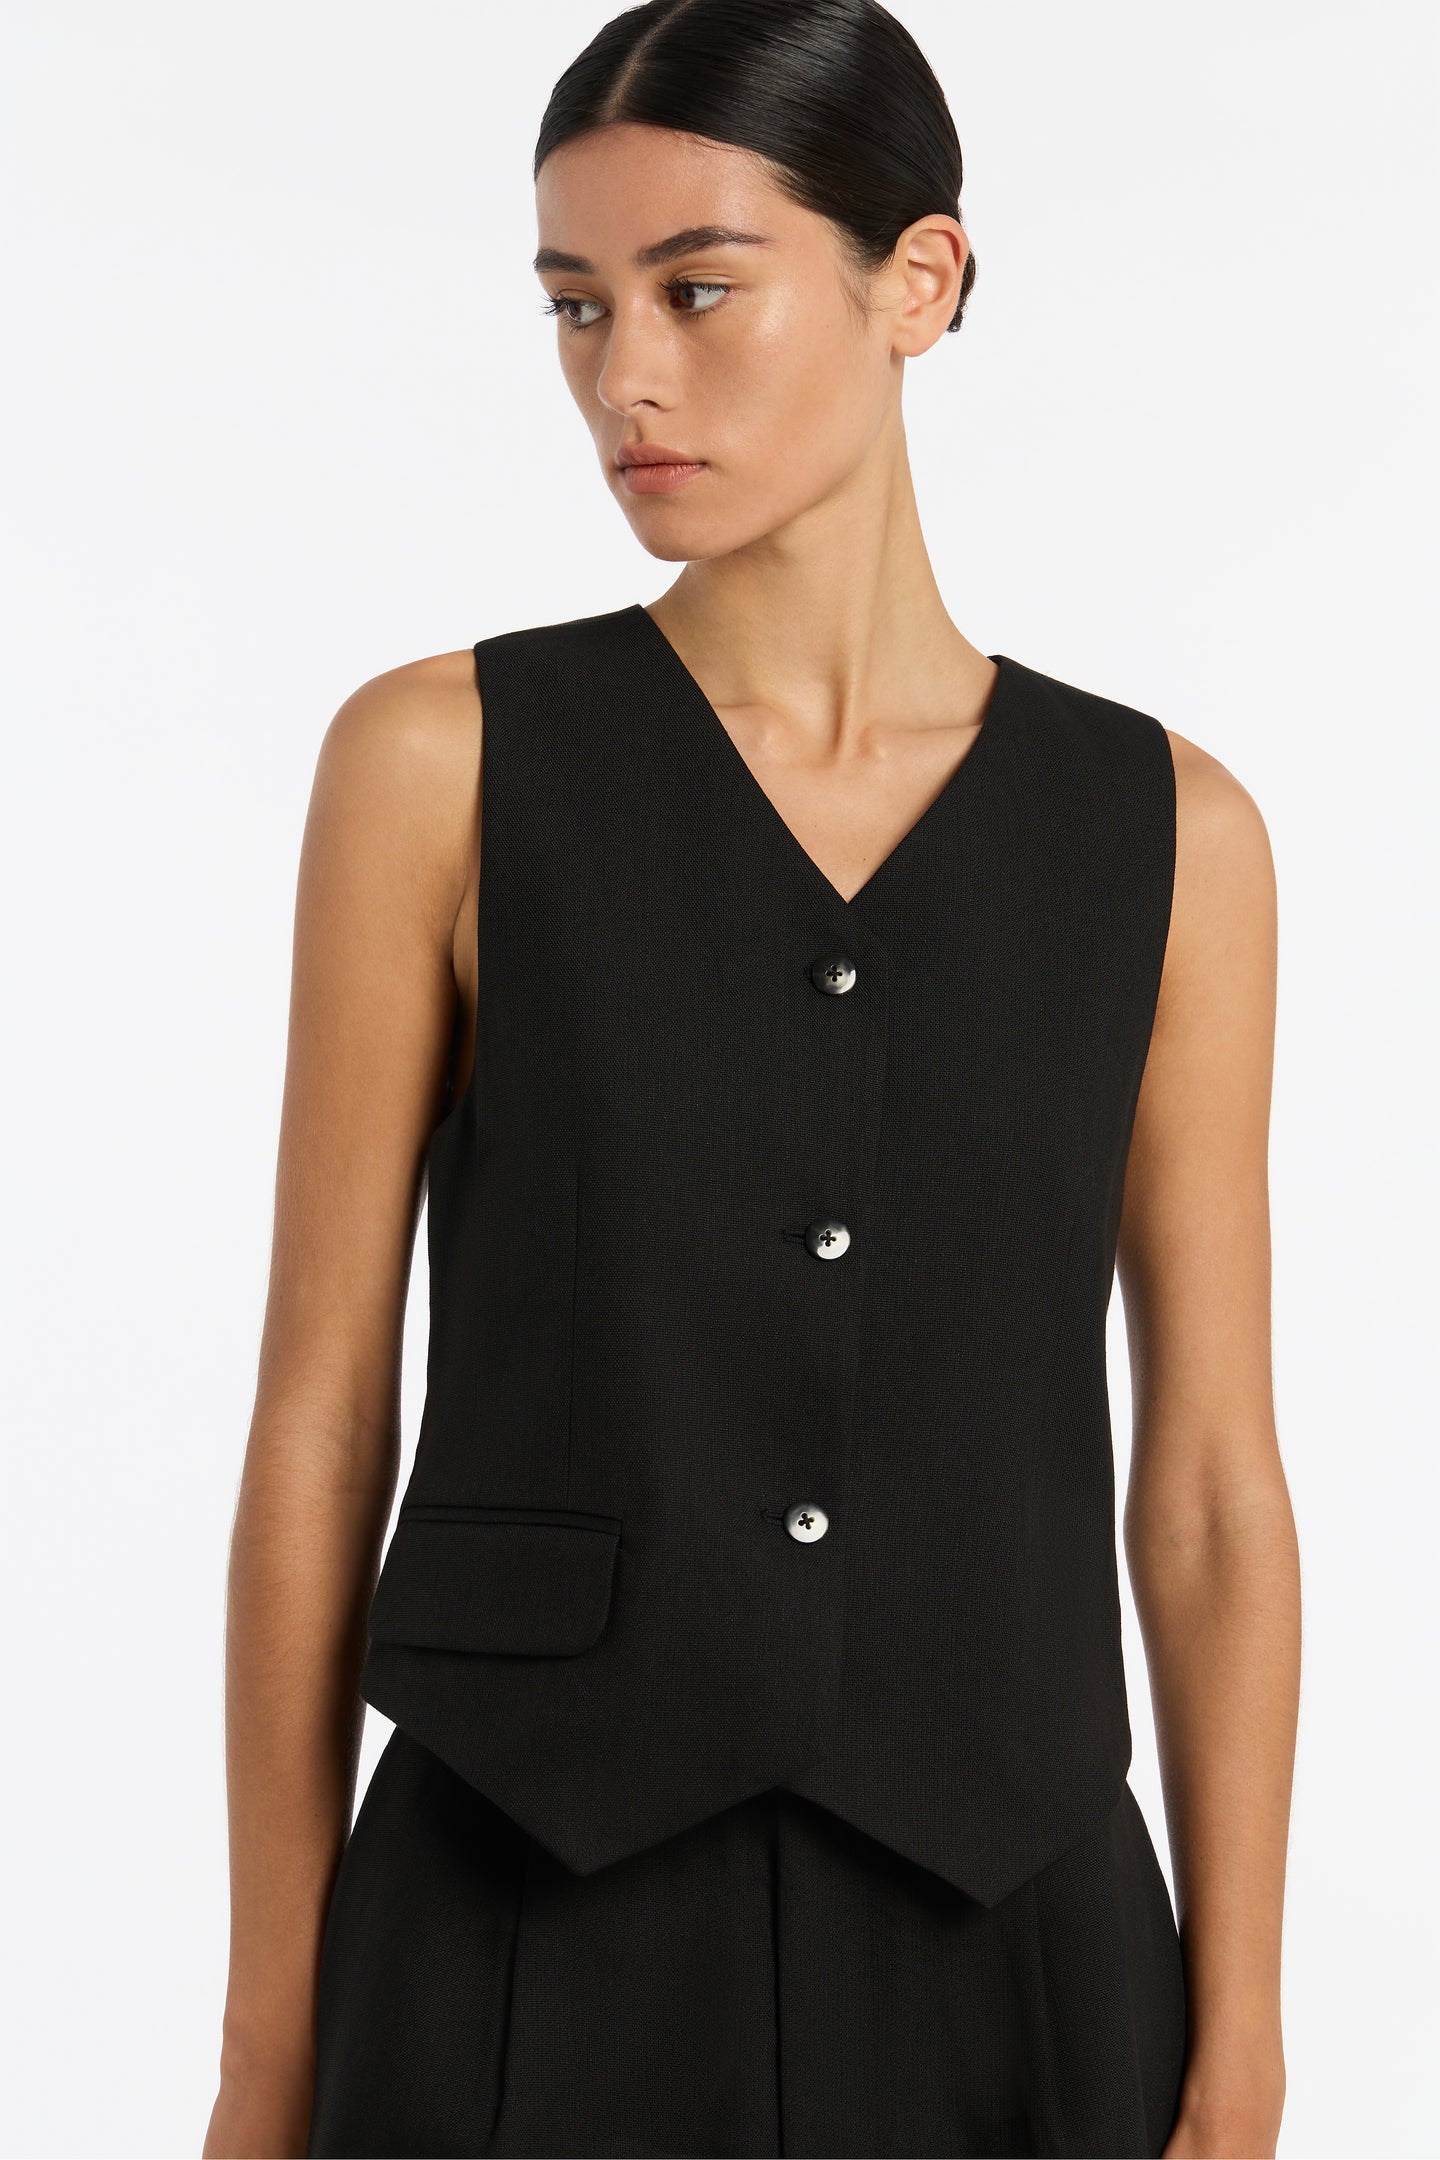 SIR. Clemence Tailored Vest - Black